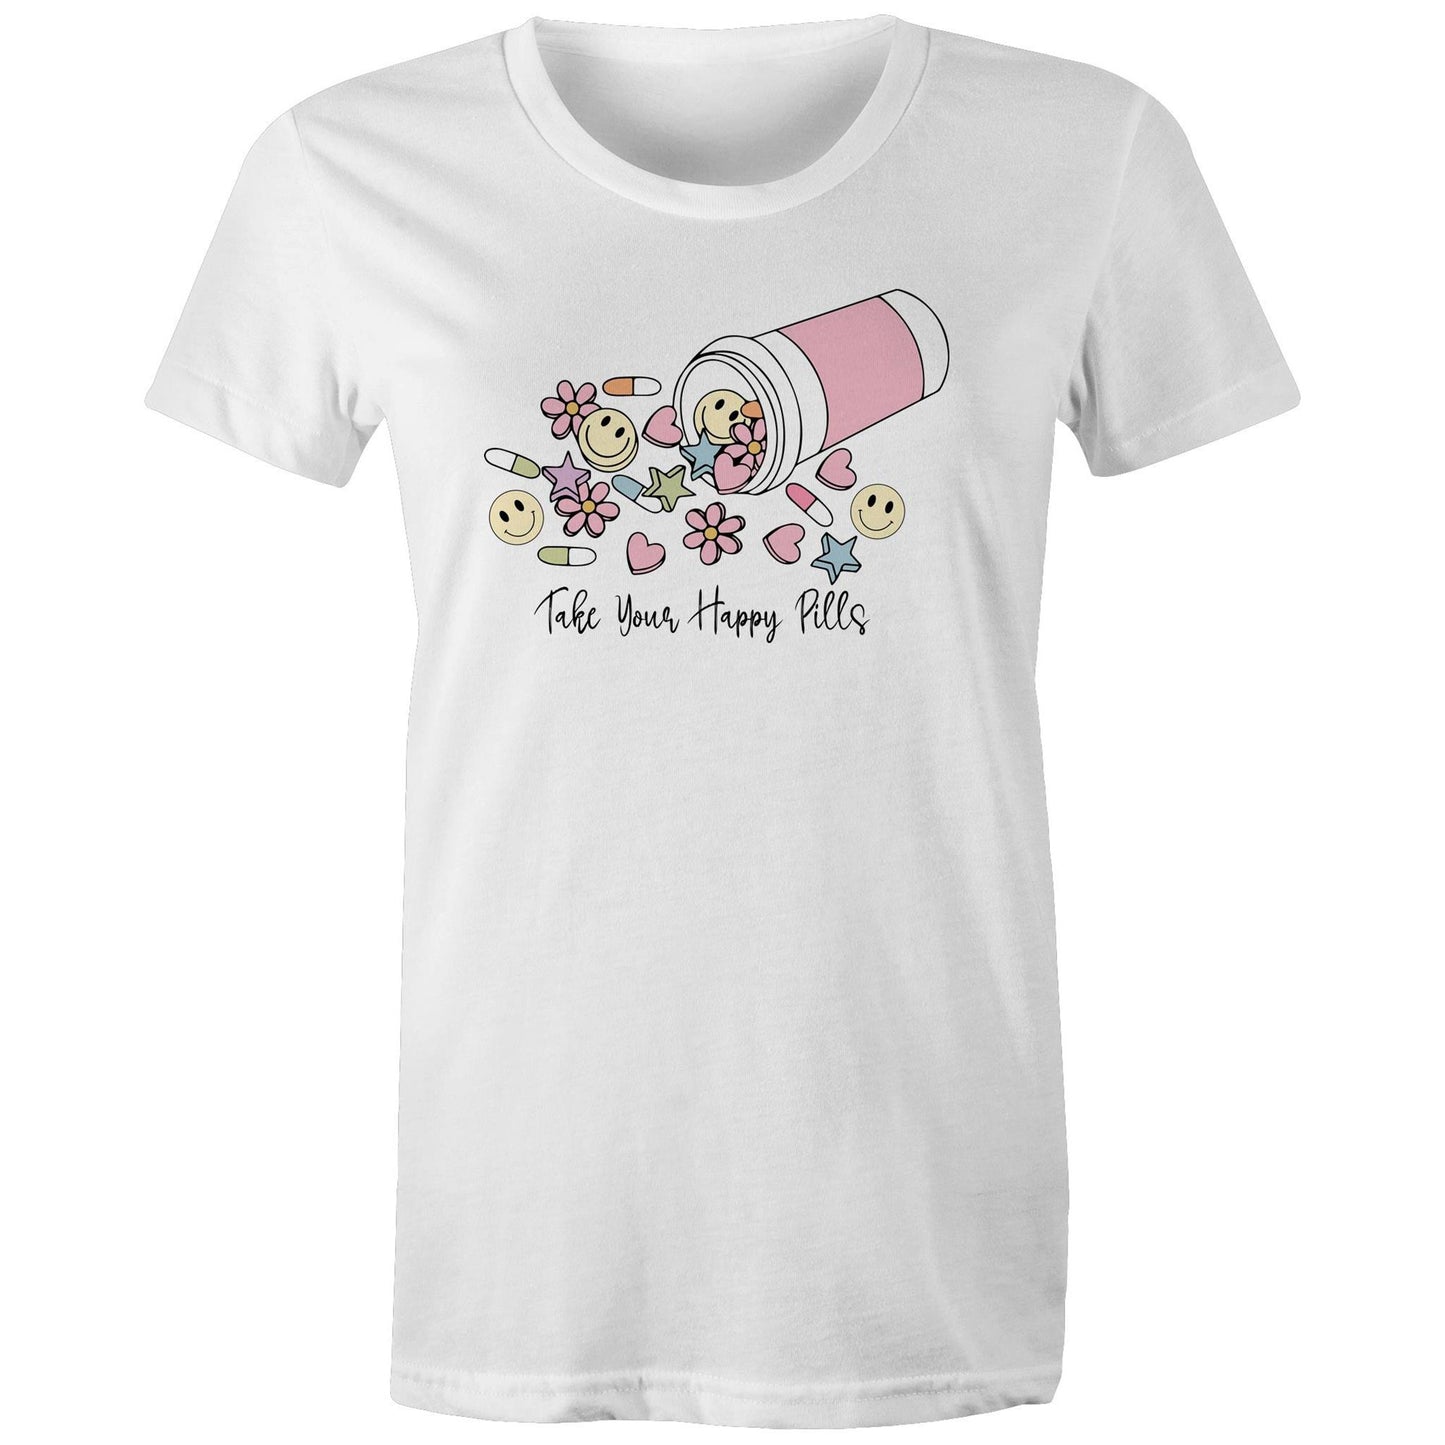 Womens Tee - Take Your Happy Pills